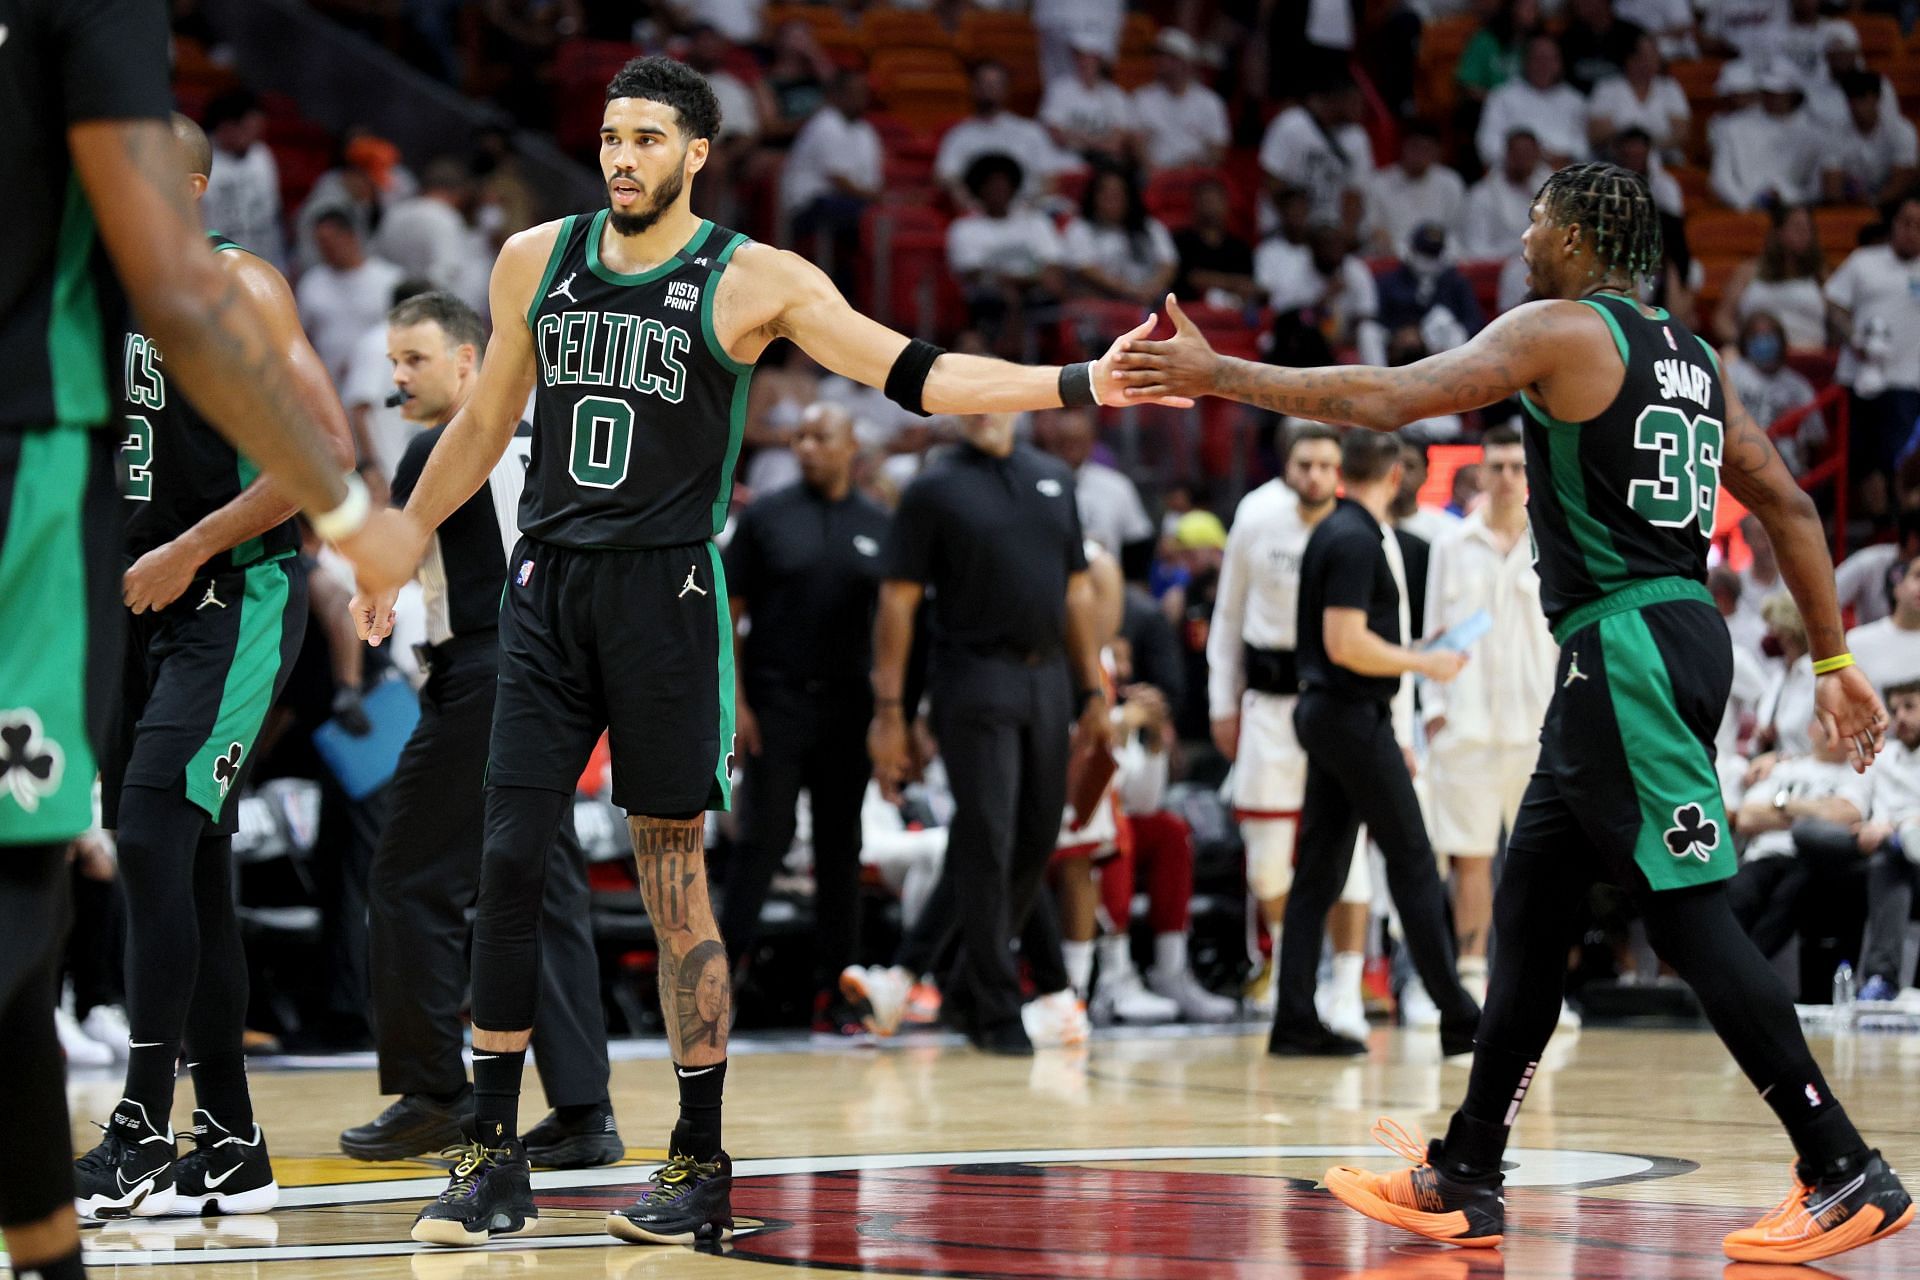 Jayson Tatum #0 of the Boston Celtics high-fives teammate Marcus Smart #36 against the Miami Heat during the fourth quarter in Game Five of the 2022 NBA Playoffs Eastern Conference Finals at FTX Arena on May 25, 2022 in Miami, Florida.